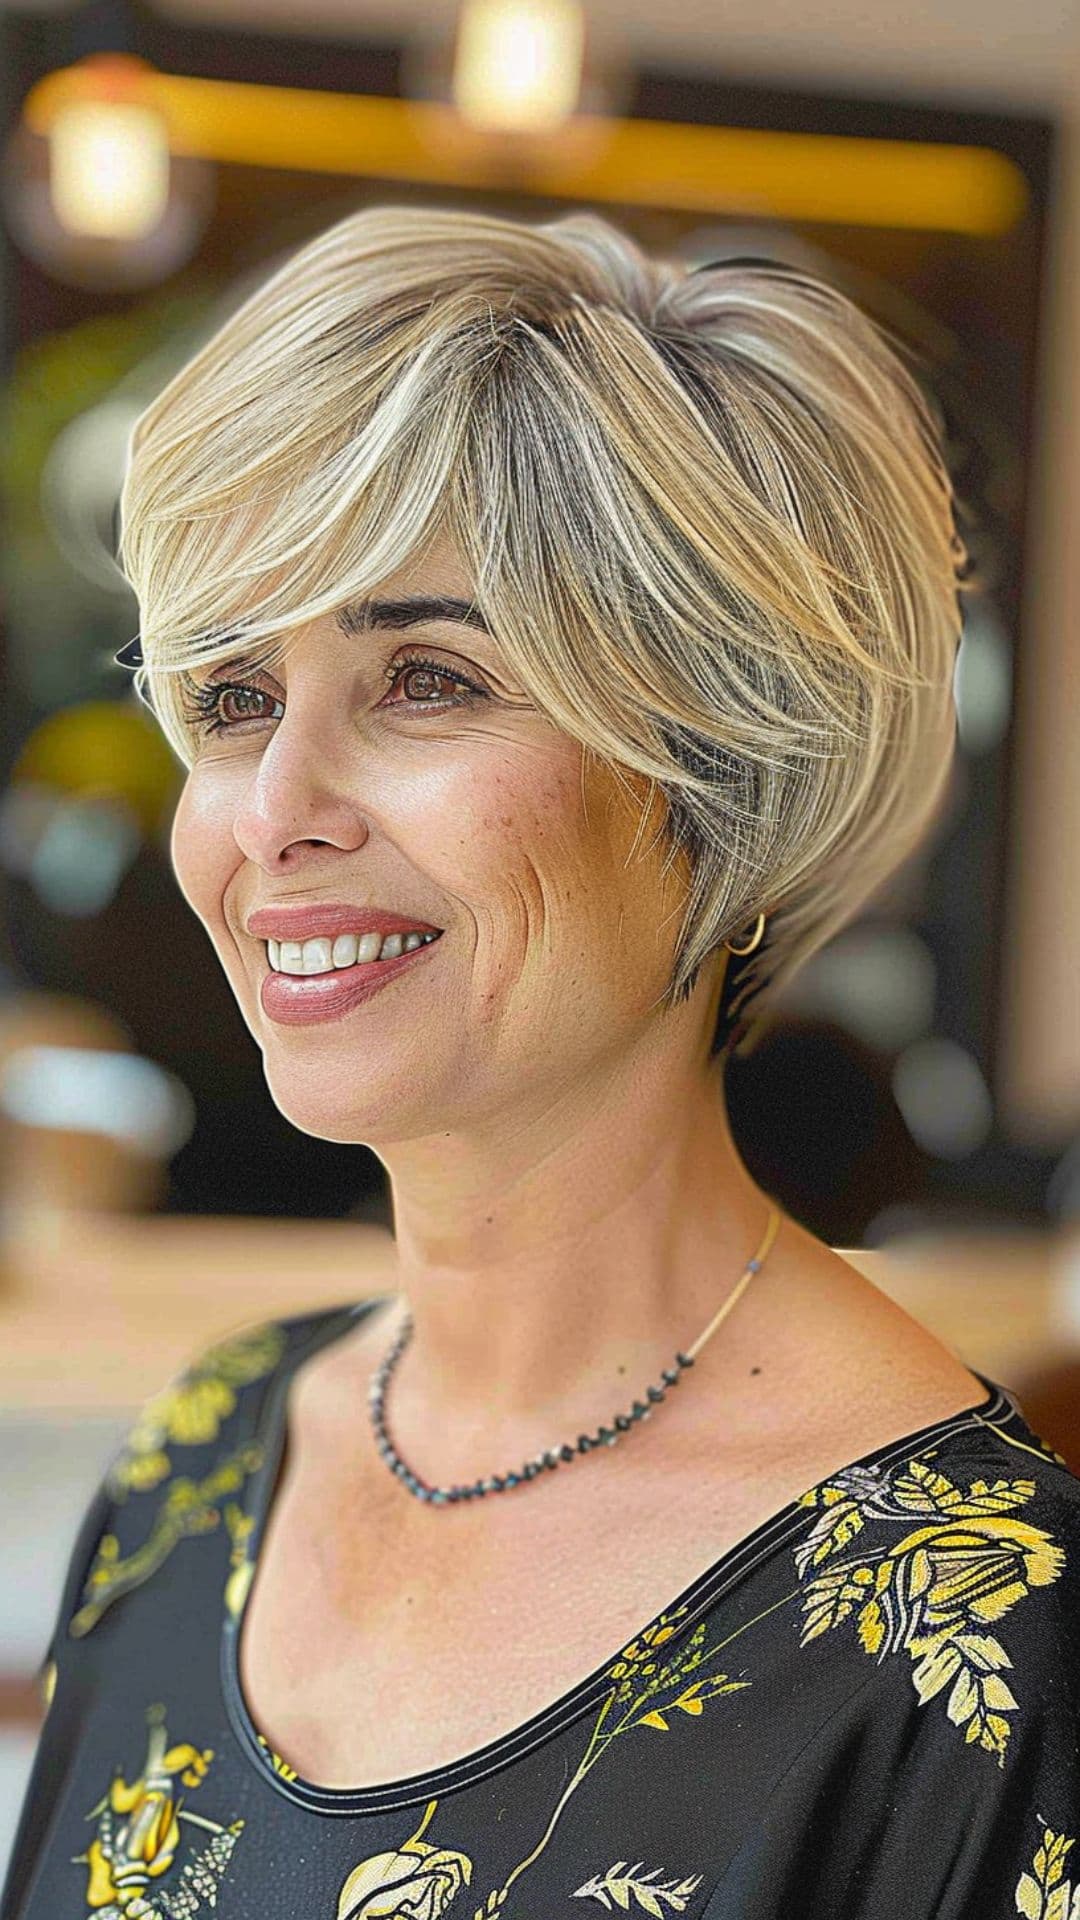 An old woman modelling a side-swept pixie bob.